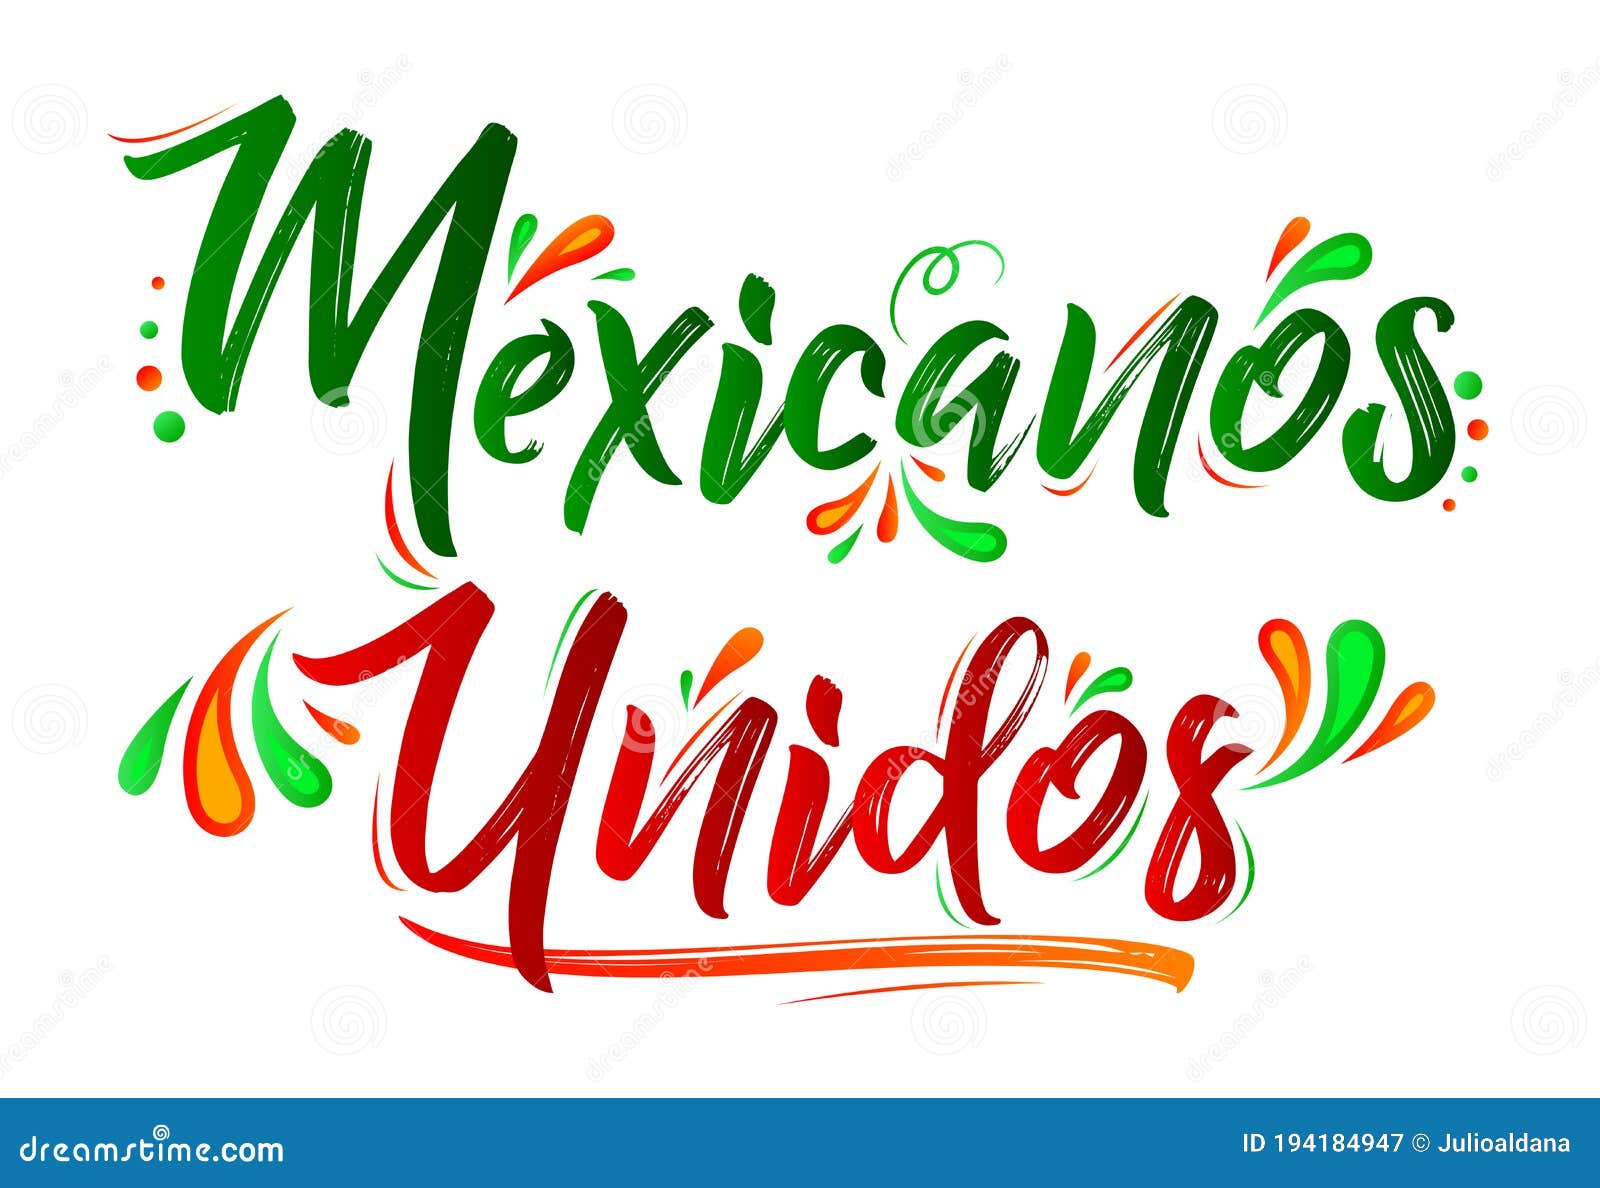 mexicanos unidos united mexicans spanish text,   together celebration.